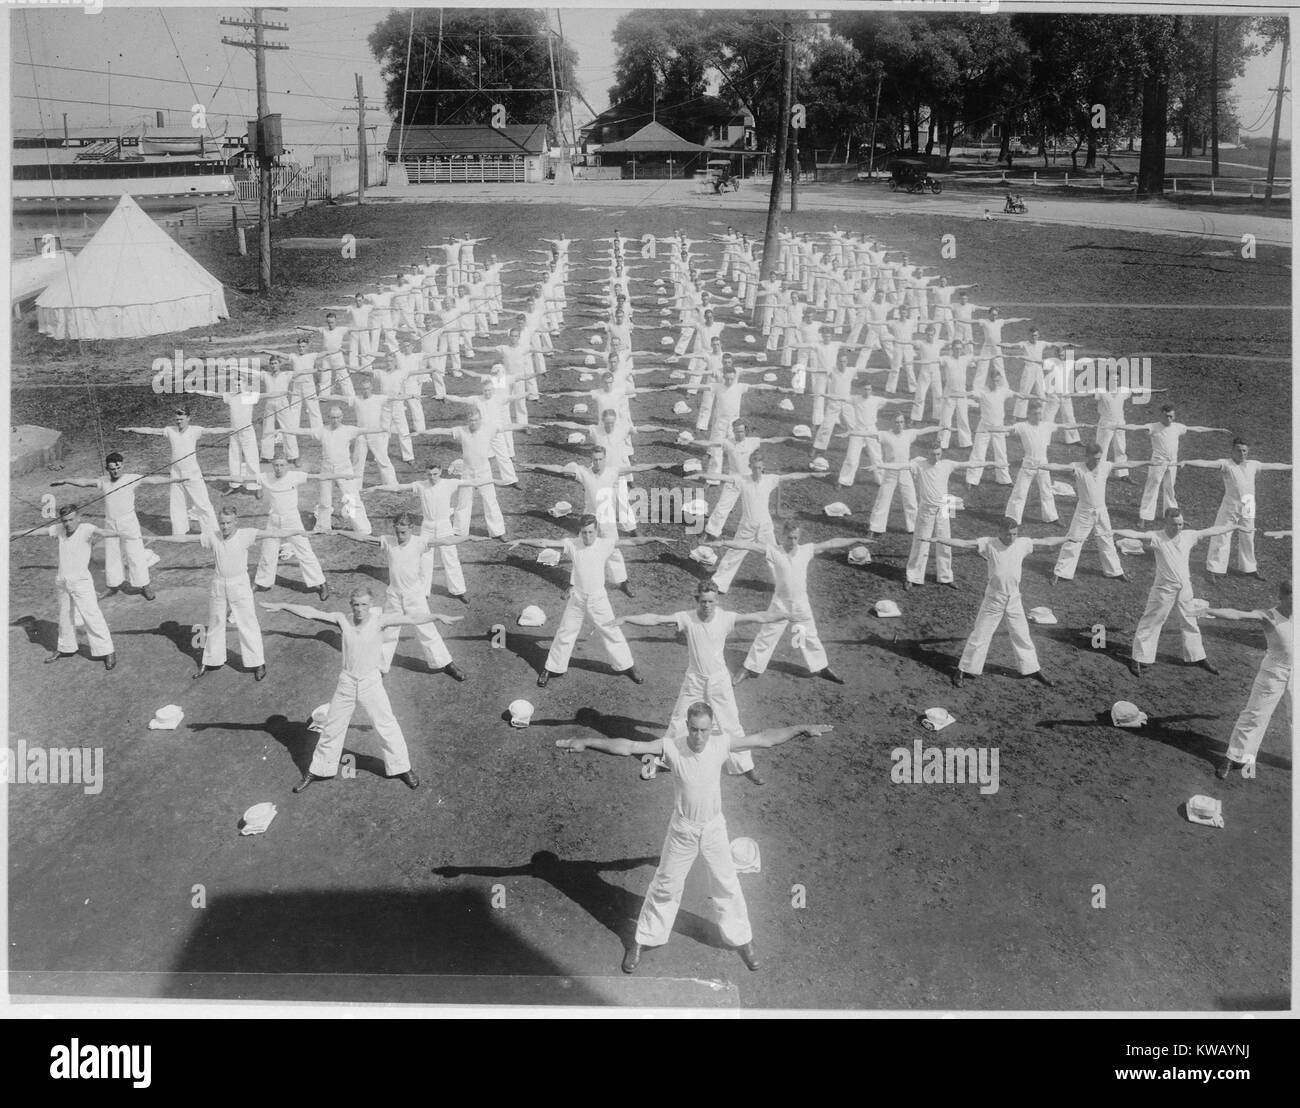 Dozens of male recruits at a Naval Militia Camp stand in formation wearing white tee shirts and pants, arms outstretched doing jumping jacks during their outdoor exercise routine, Somersville, New York, 1917. Image courtesy National Archives. Stock Photo